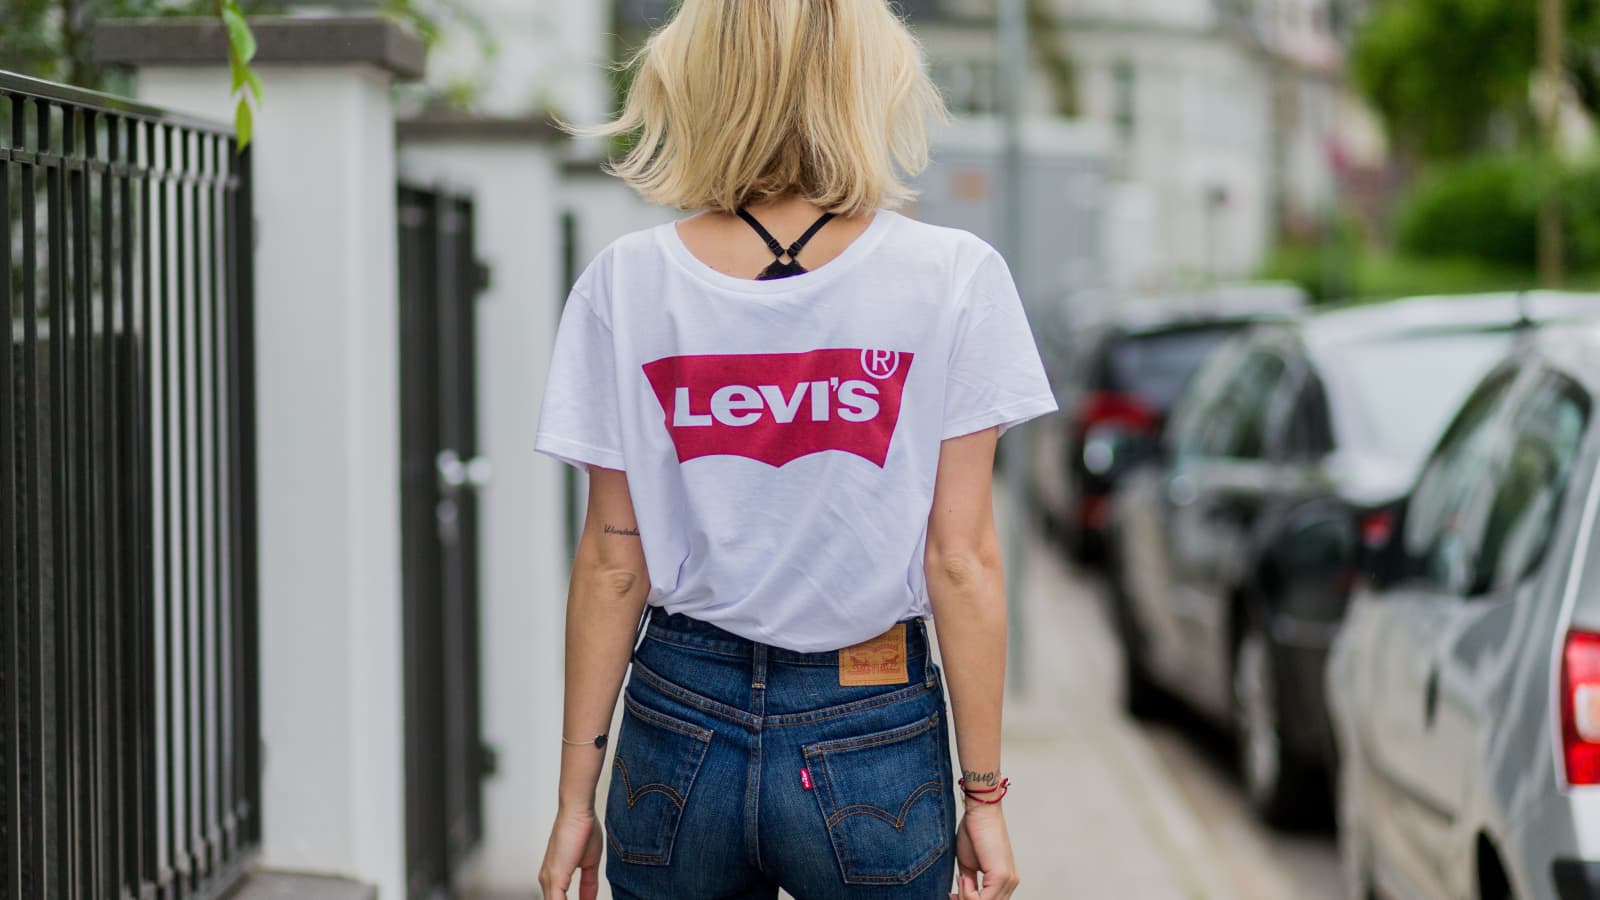 Levi Strauss CEO: 'Sizes will go out the window 10 years from now'